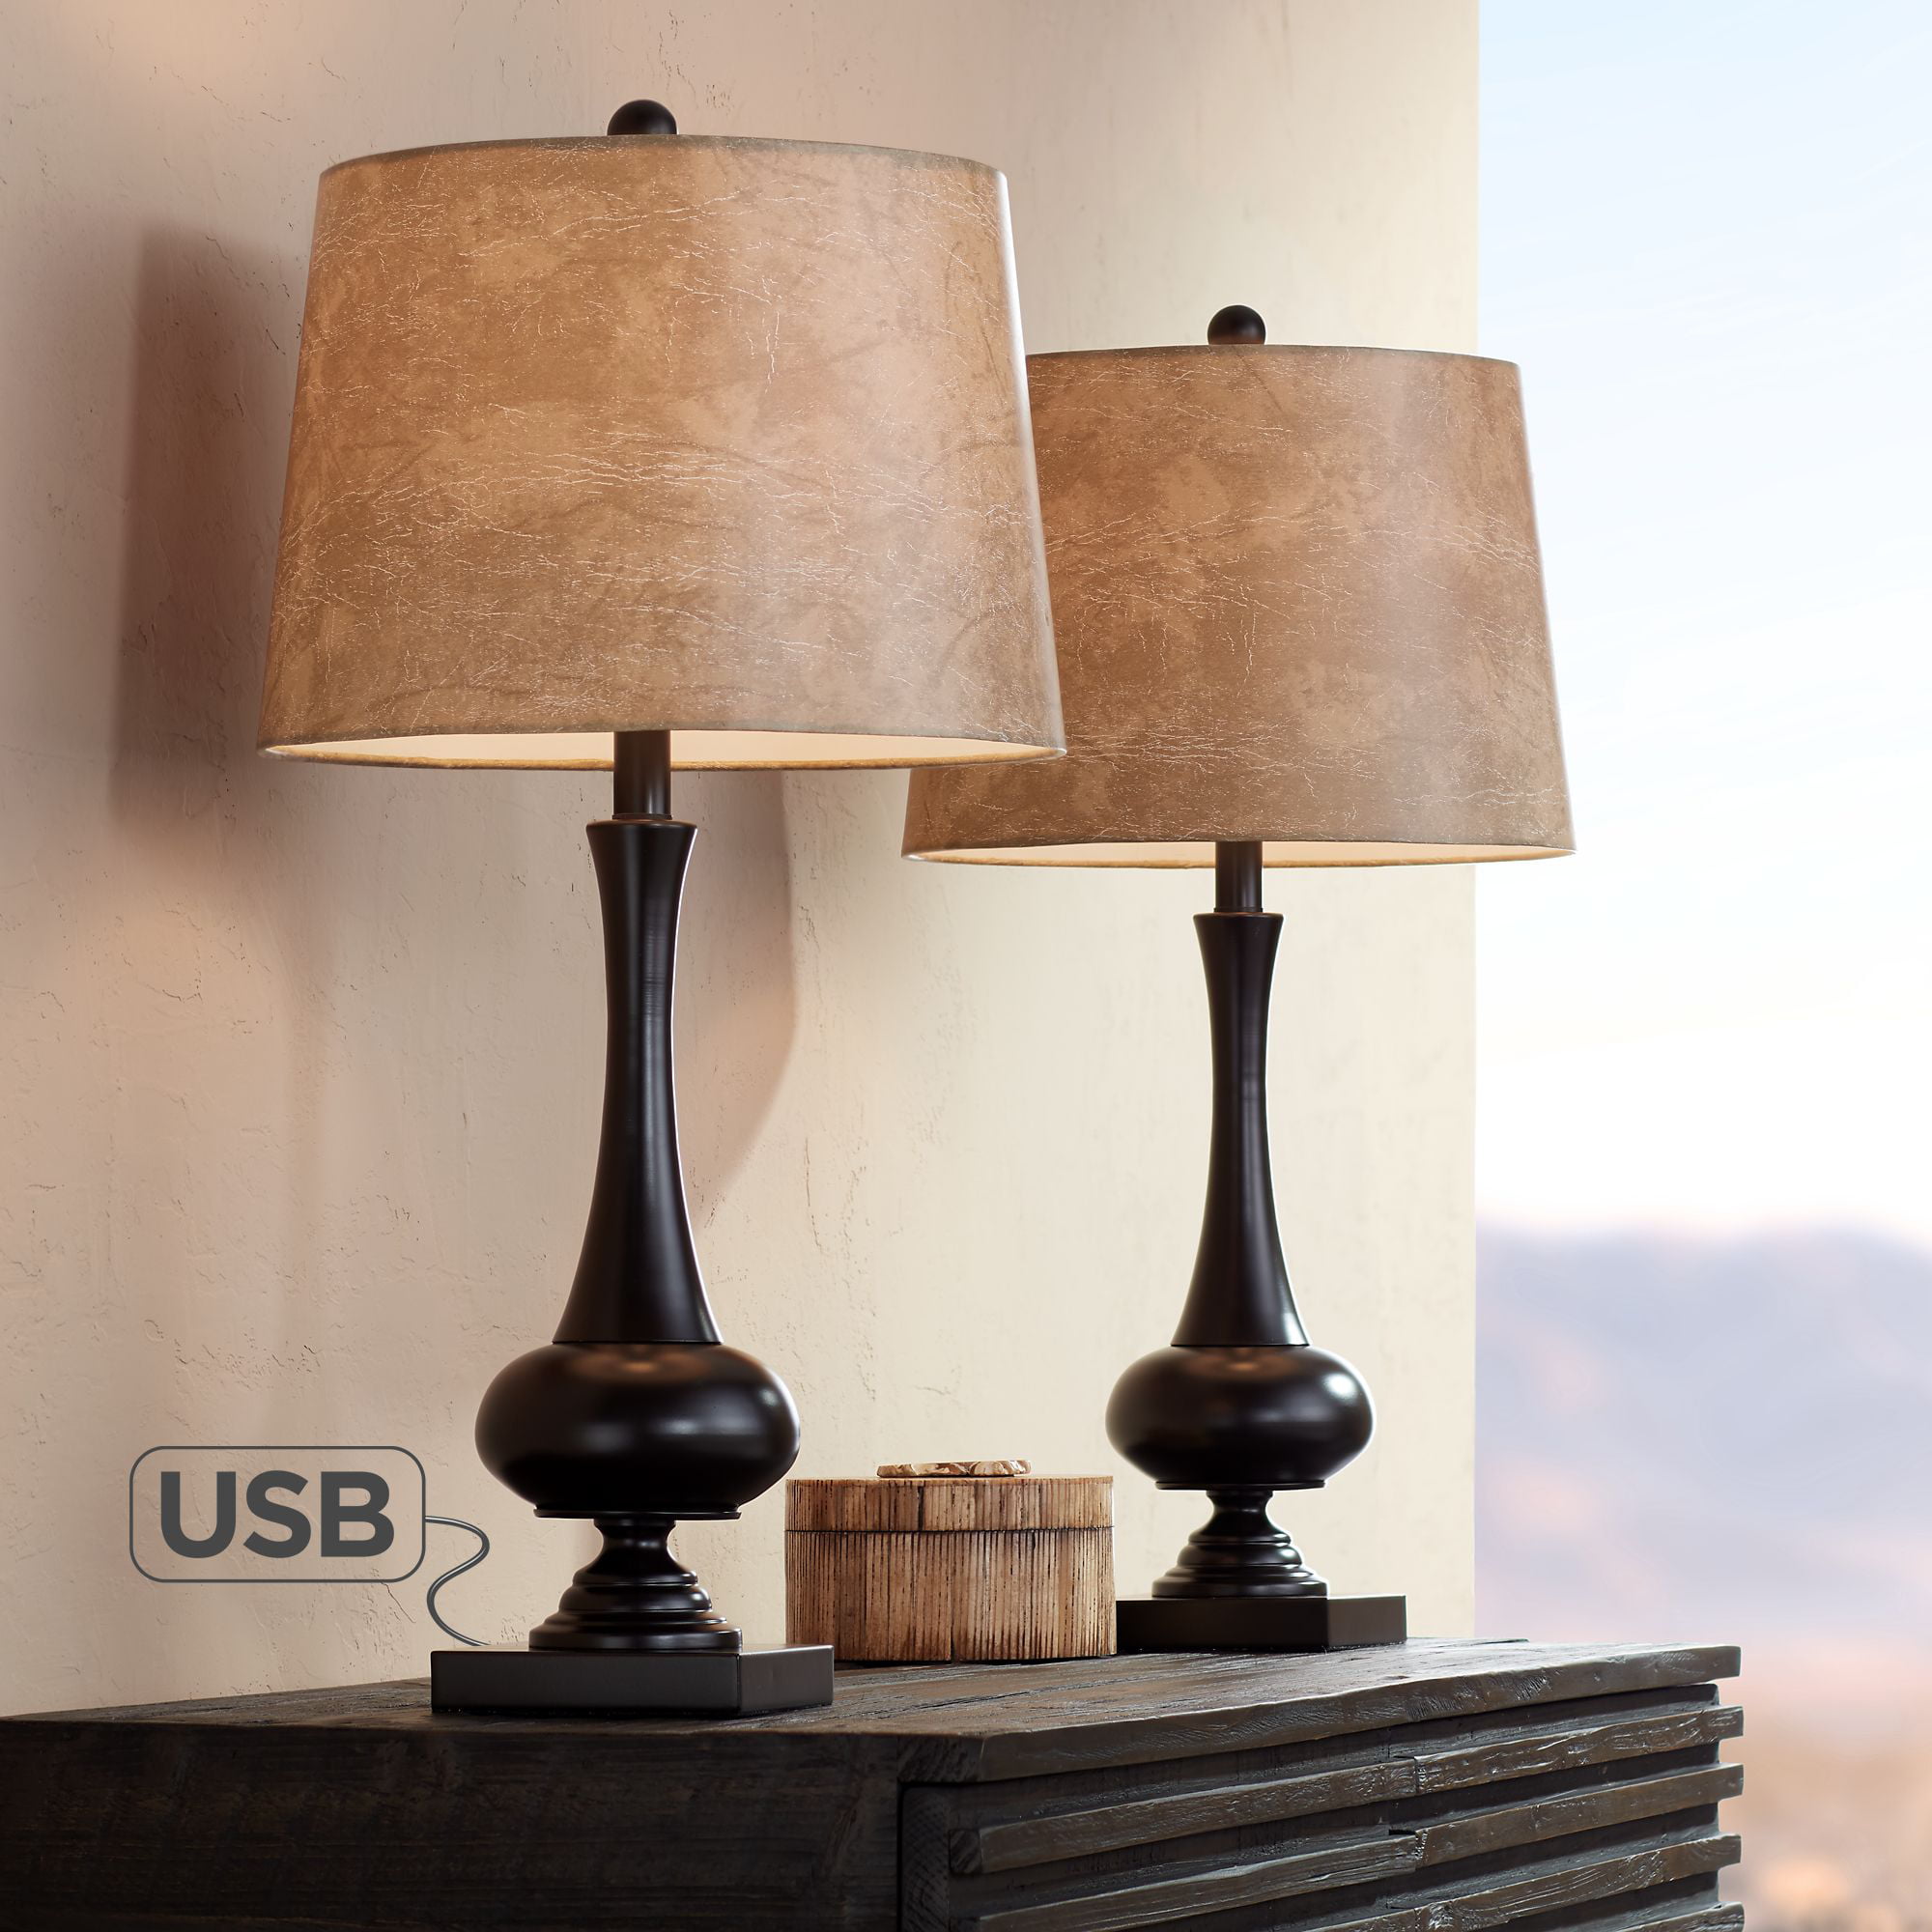 Franklin Iron Works Modern Rustic Table Lamps Set of 2 with USB Charging  Port Bronze Faux Leather Drum Shade Living Room Bedroom - Walmart.com